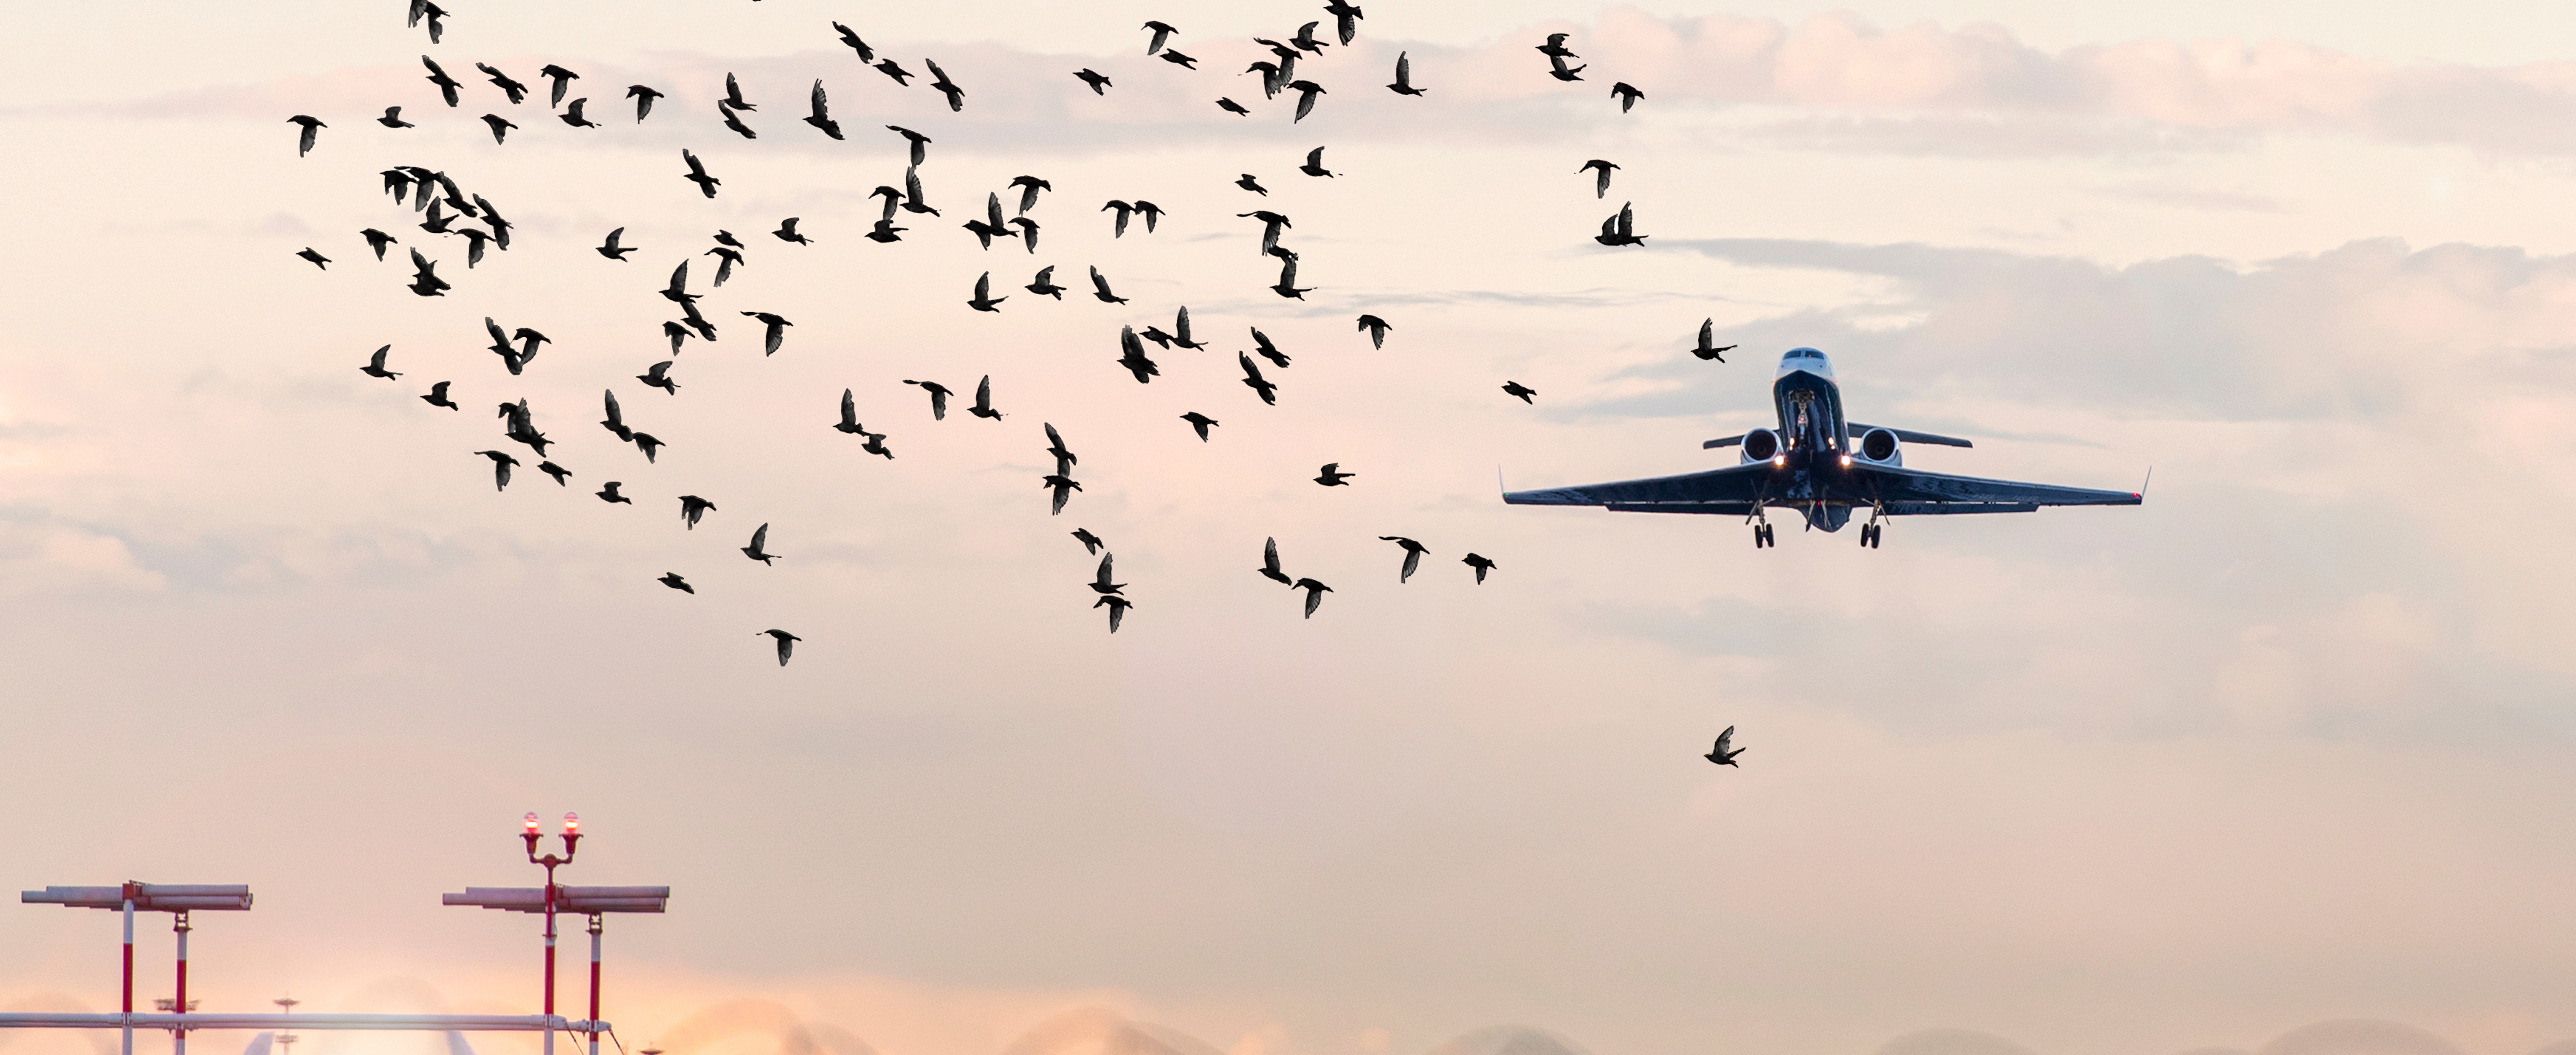 An airplane flies into a group of birds over a runway